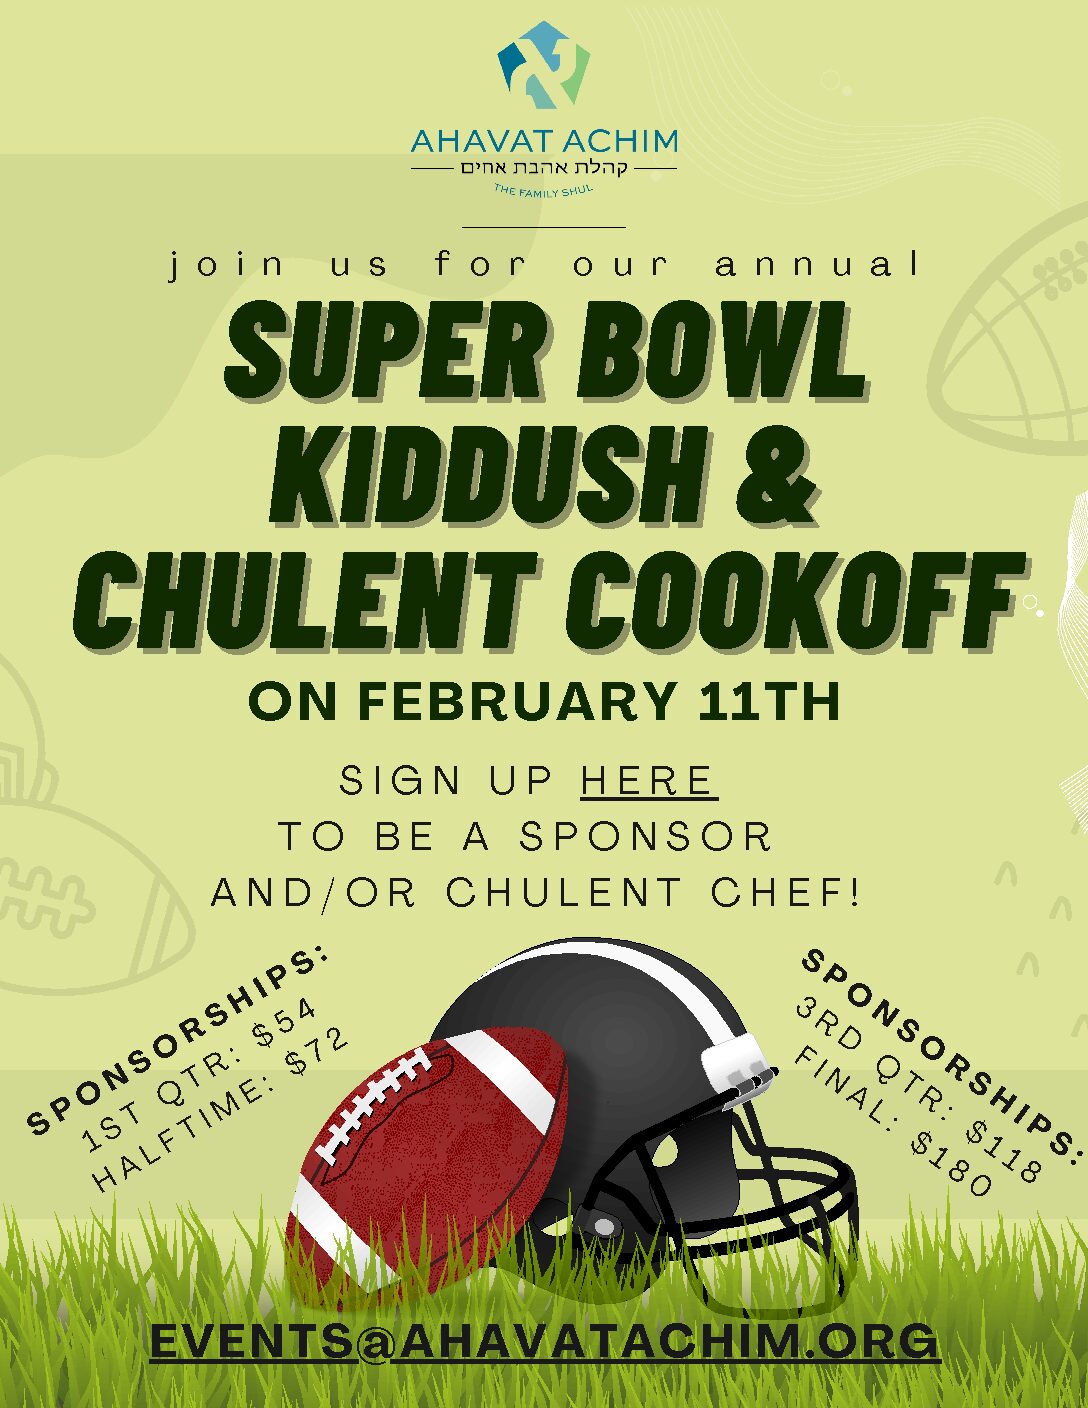 Super Bowl Kiddush and Chulent Cookoff